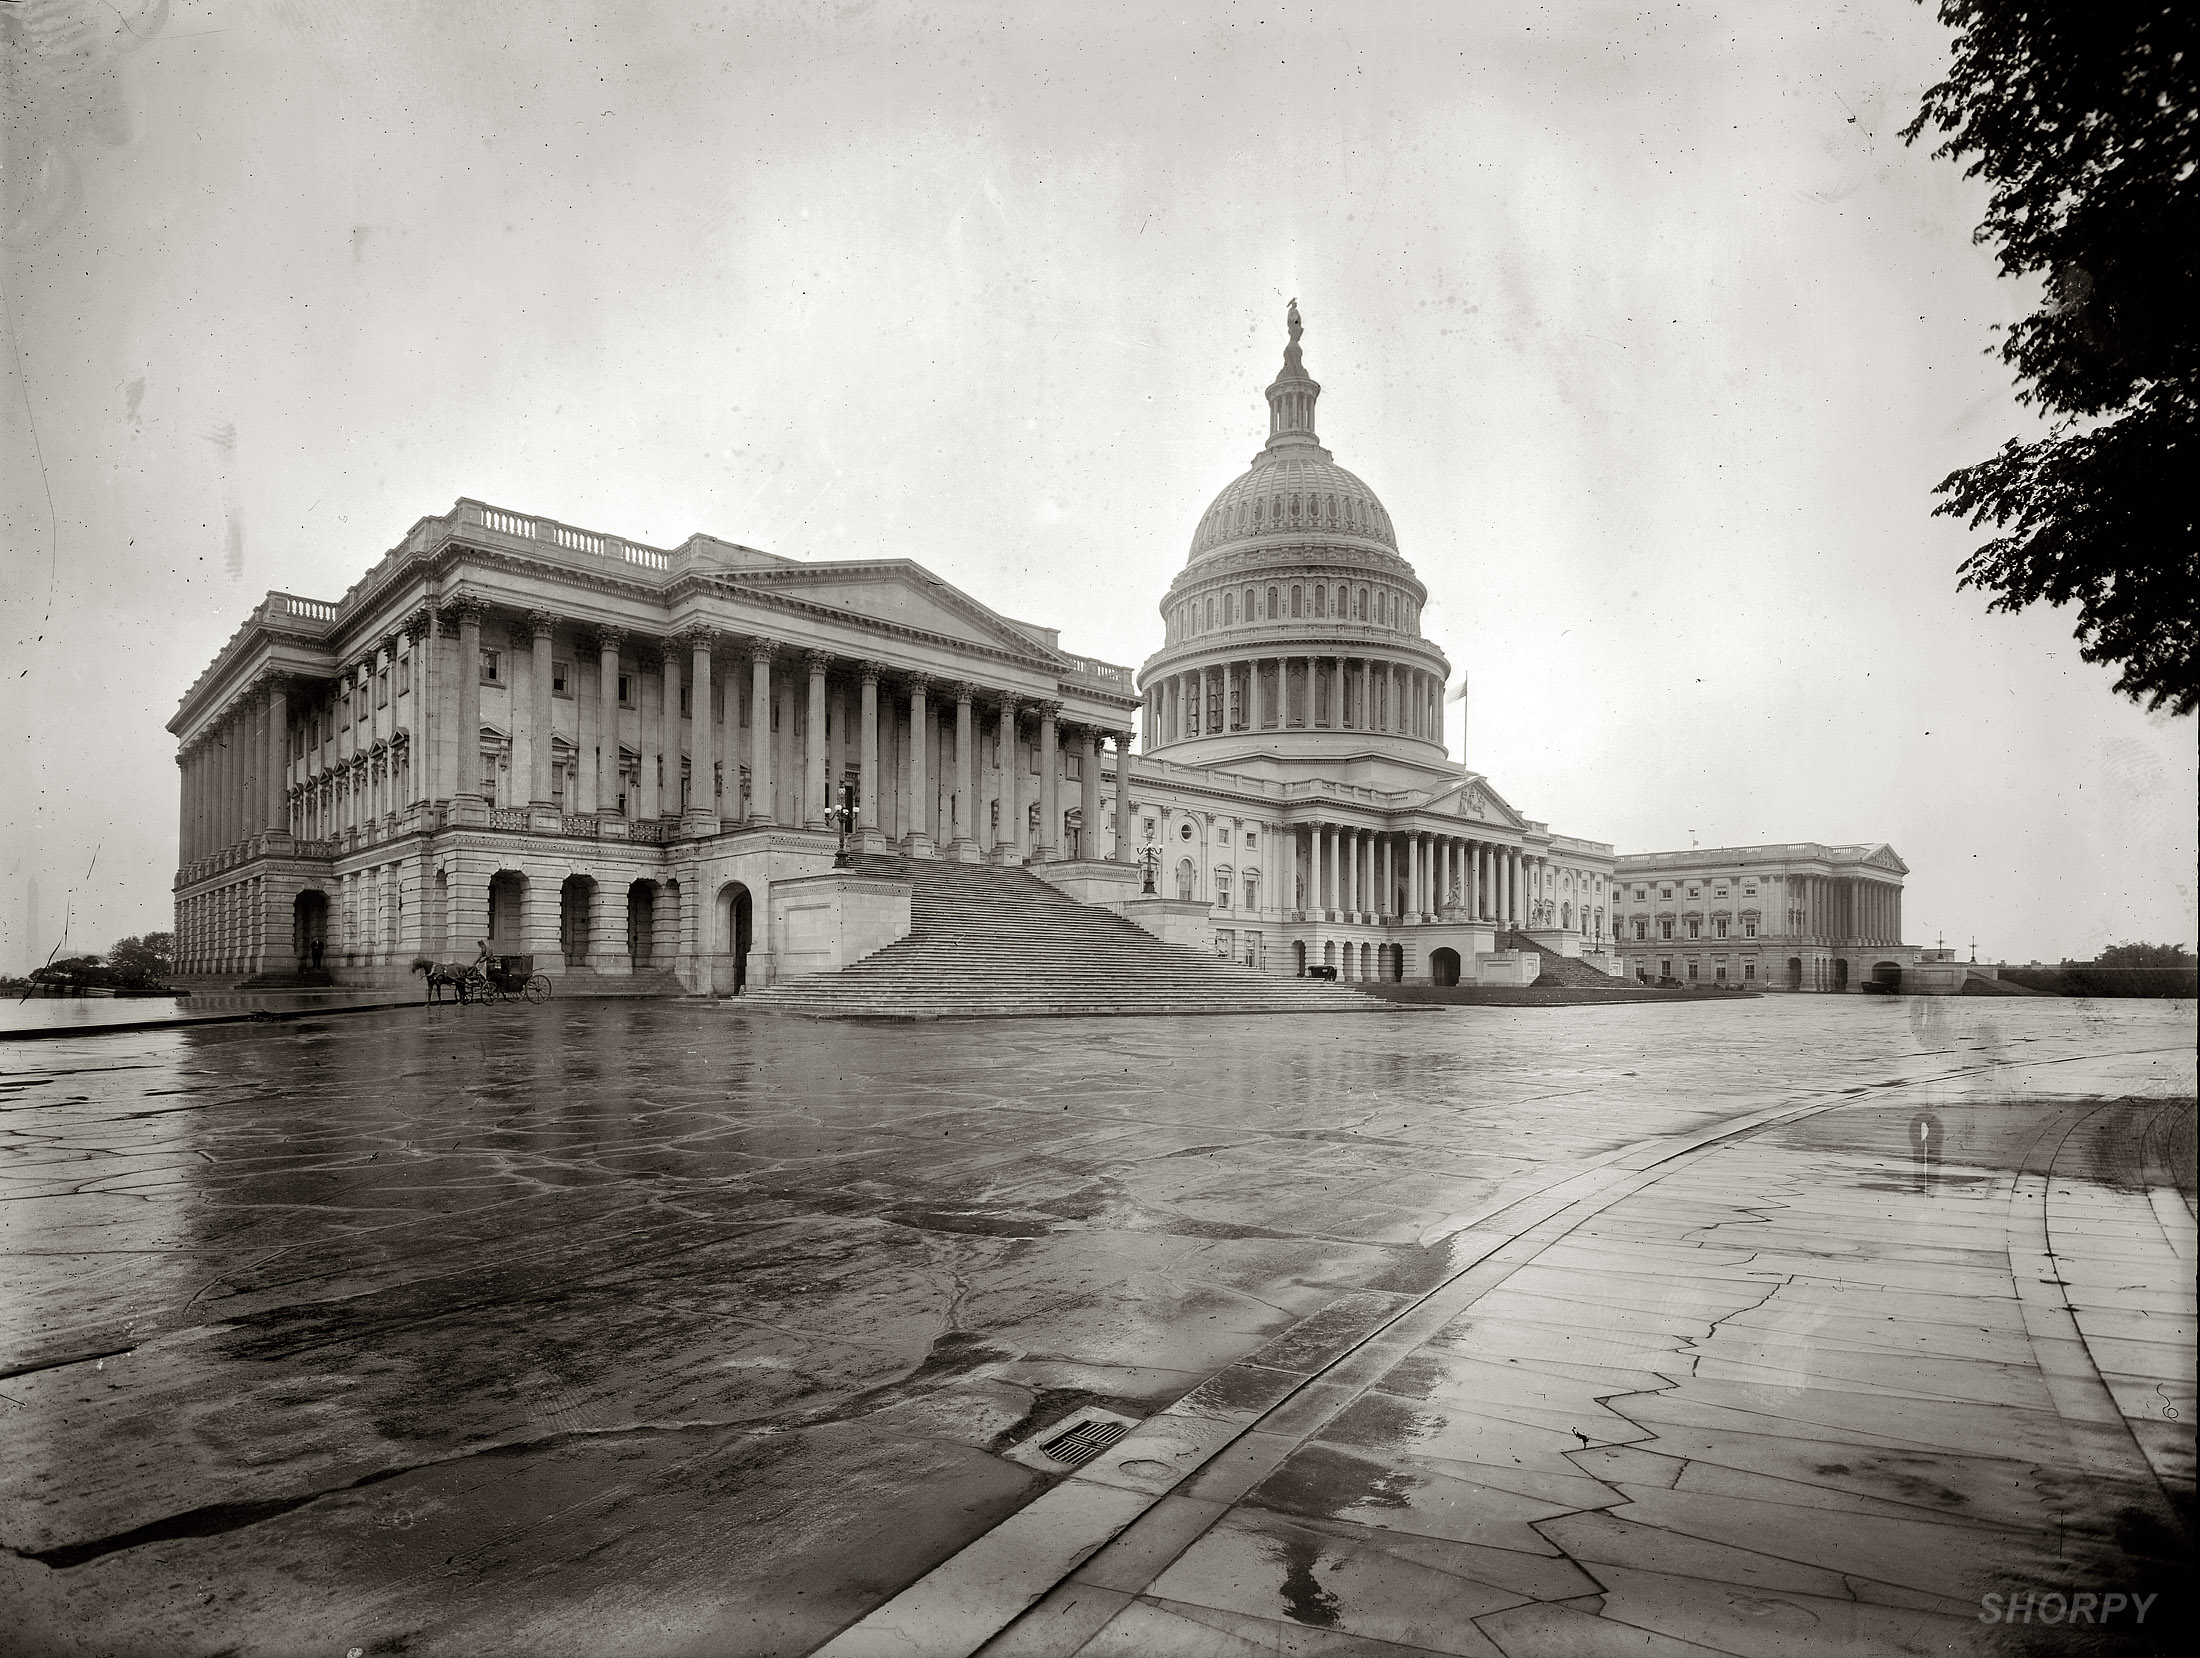 1908. The East Front of the U.S. Capitol, with the Washington Monument at left. View full size. 8x10 glass negative, George Grantham Bain Collection.